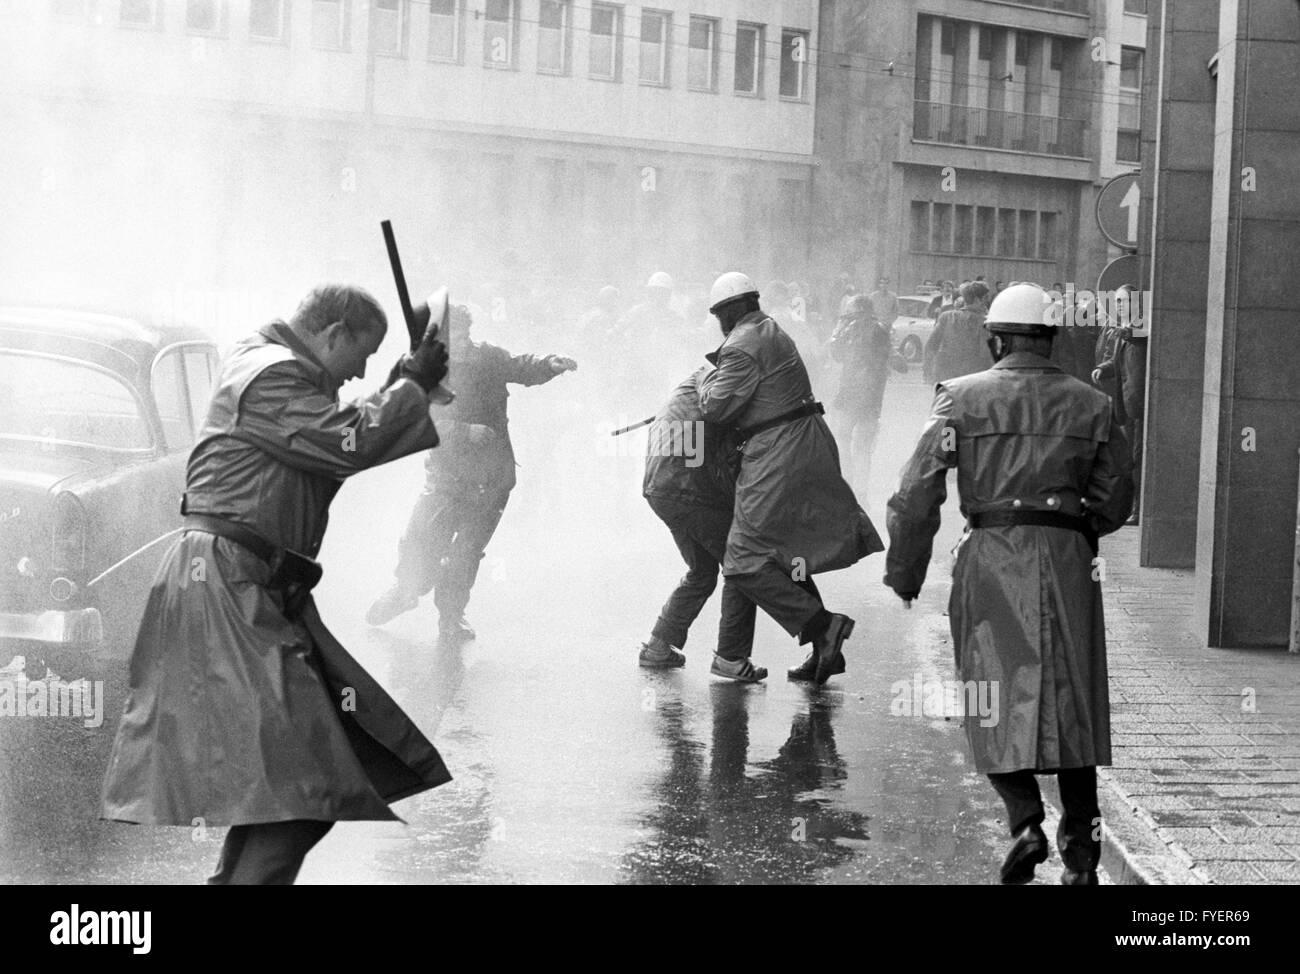 Police uses waterguns against student demonstrators, who protest against the awarding of the Peace Prize of the German Book Trade to Sengalese state president Senghor in front of Paulskirche in Frankfurt on 22 September 1968. Stock Photo